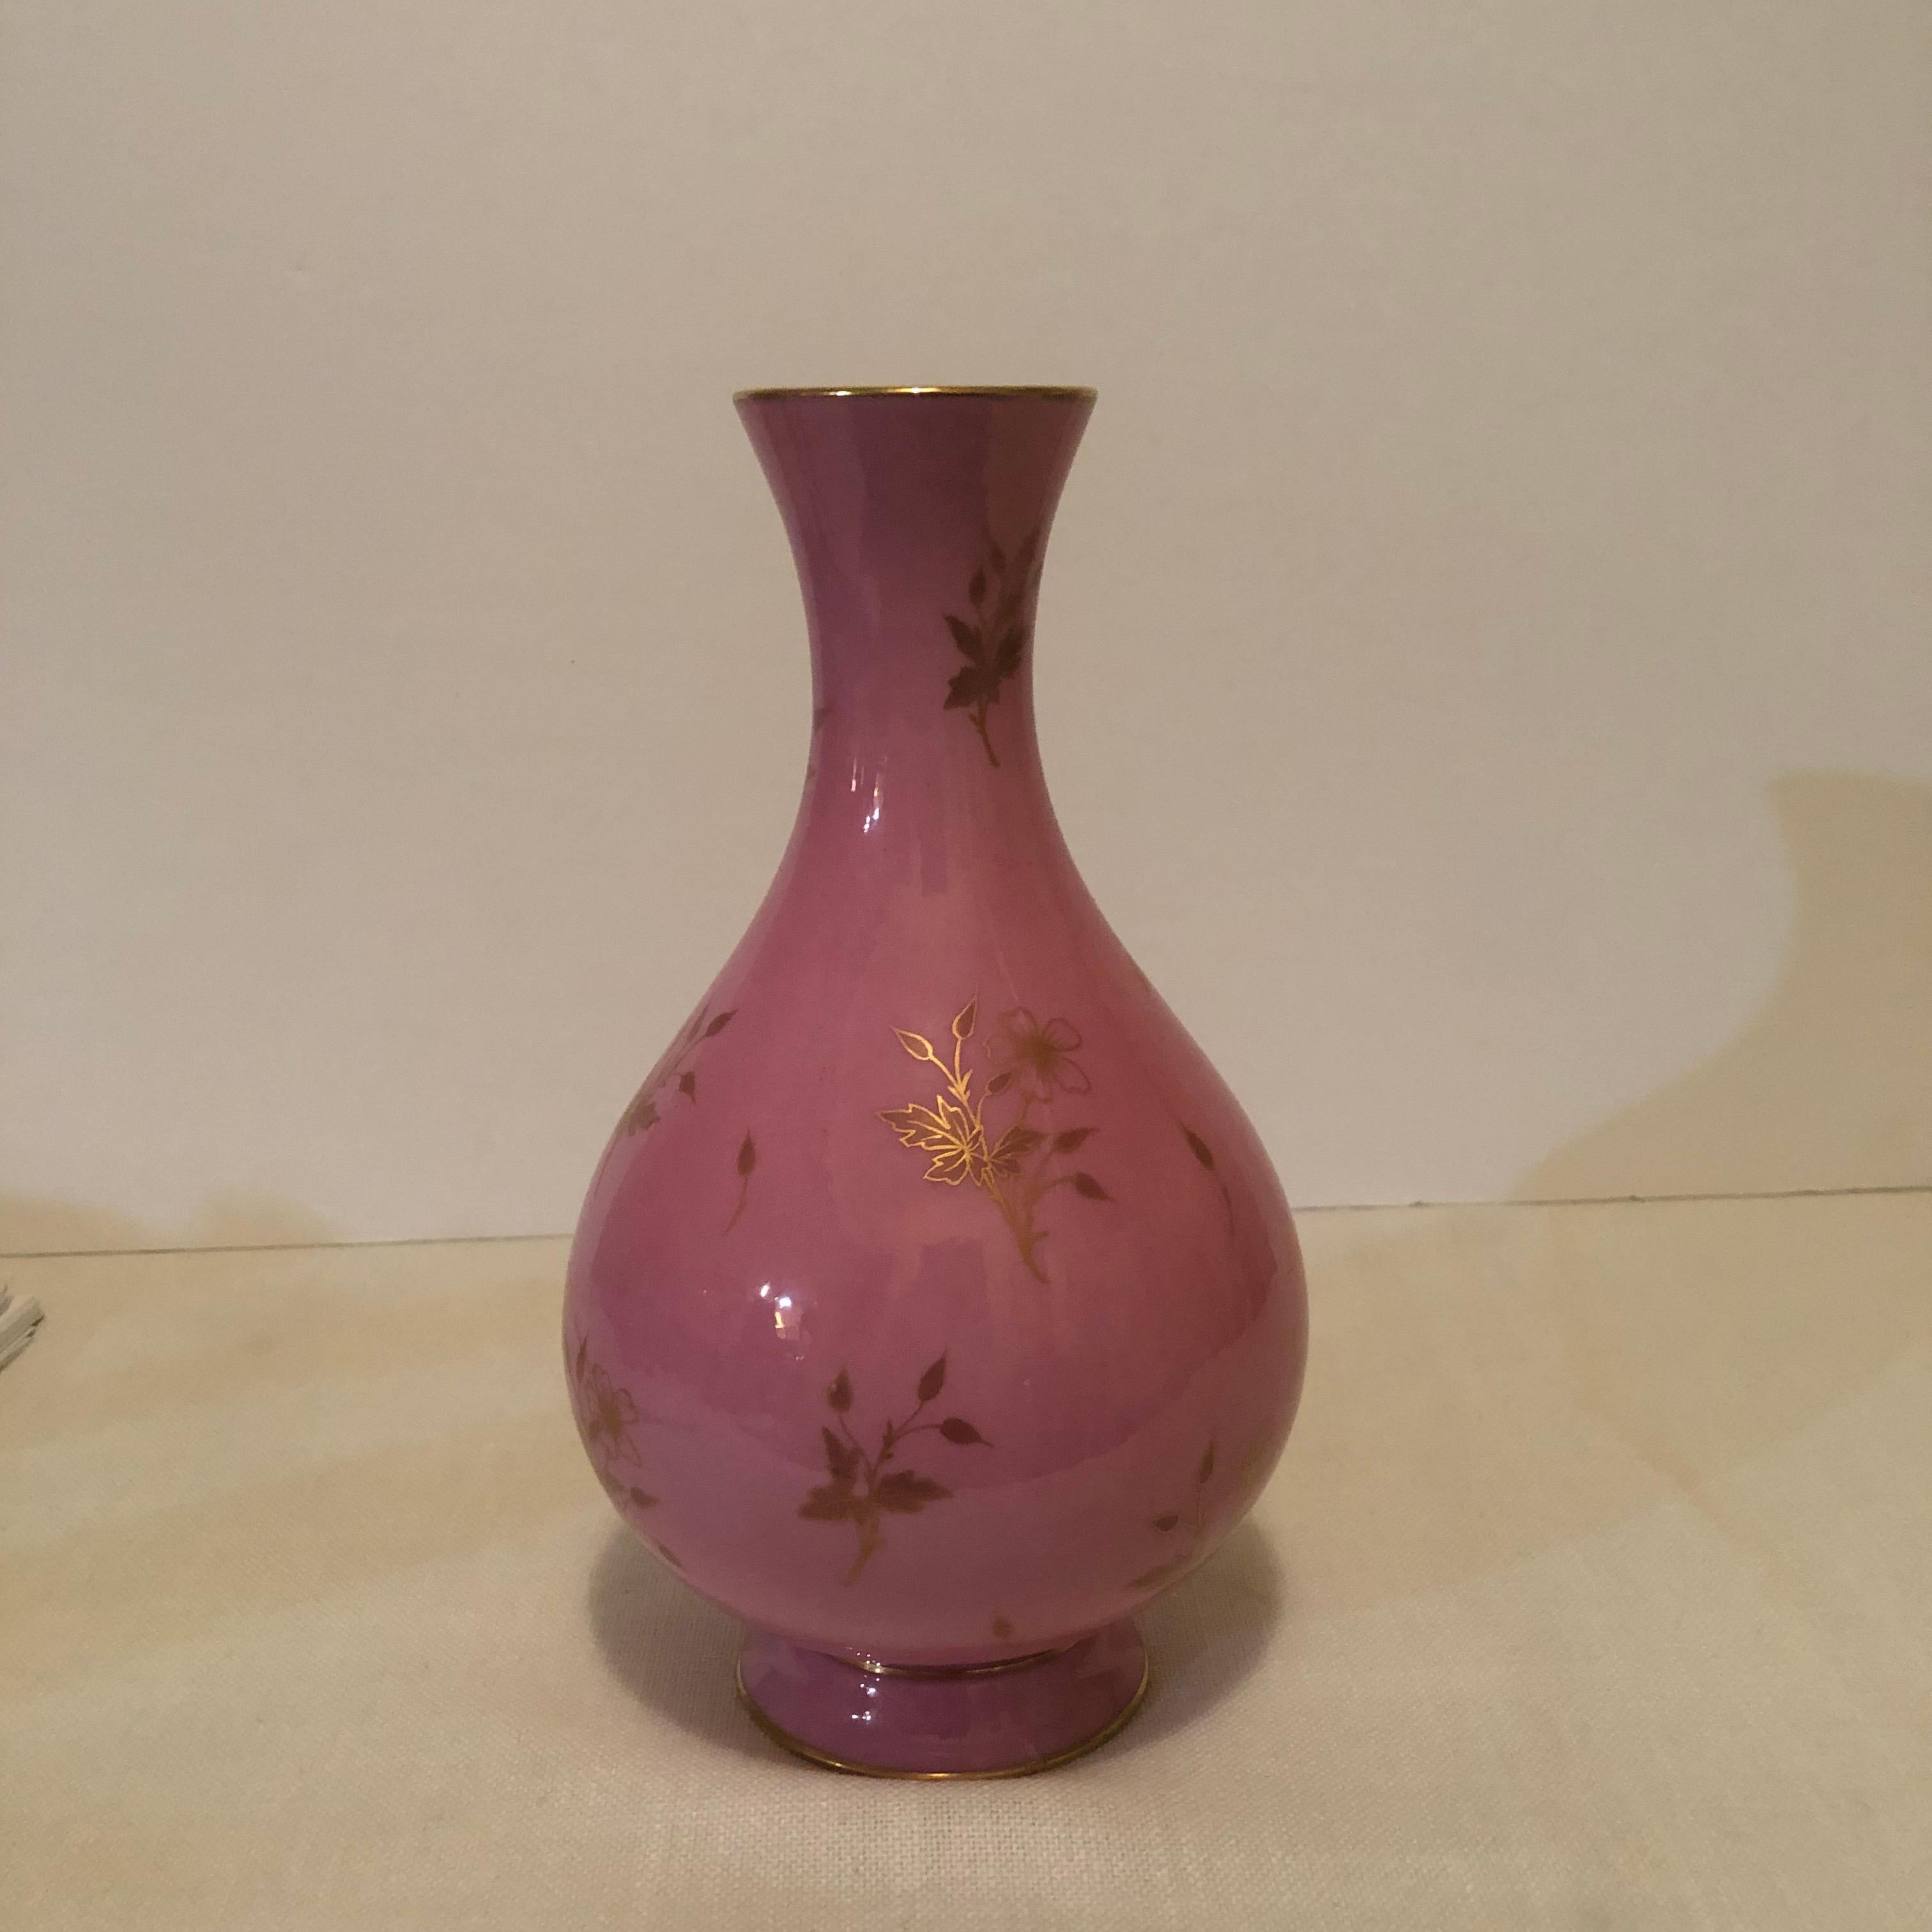 This is a lovely Sevres vase in the eye-catching pink pompadour color with painted accents of gold flowers. It is signed Dore a Sevres, 1898. The pink color was Madame de Pompadour's favorite color for Sevres porcelain. That is why it is called pink